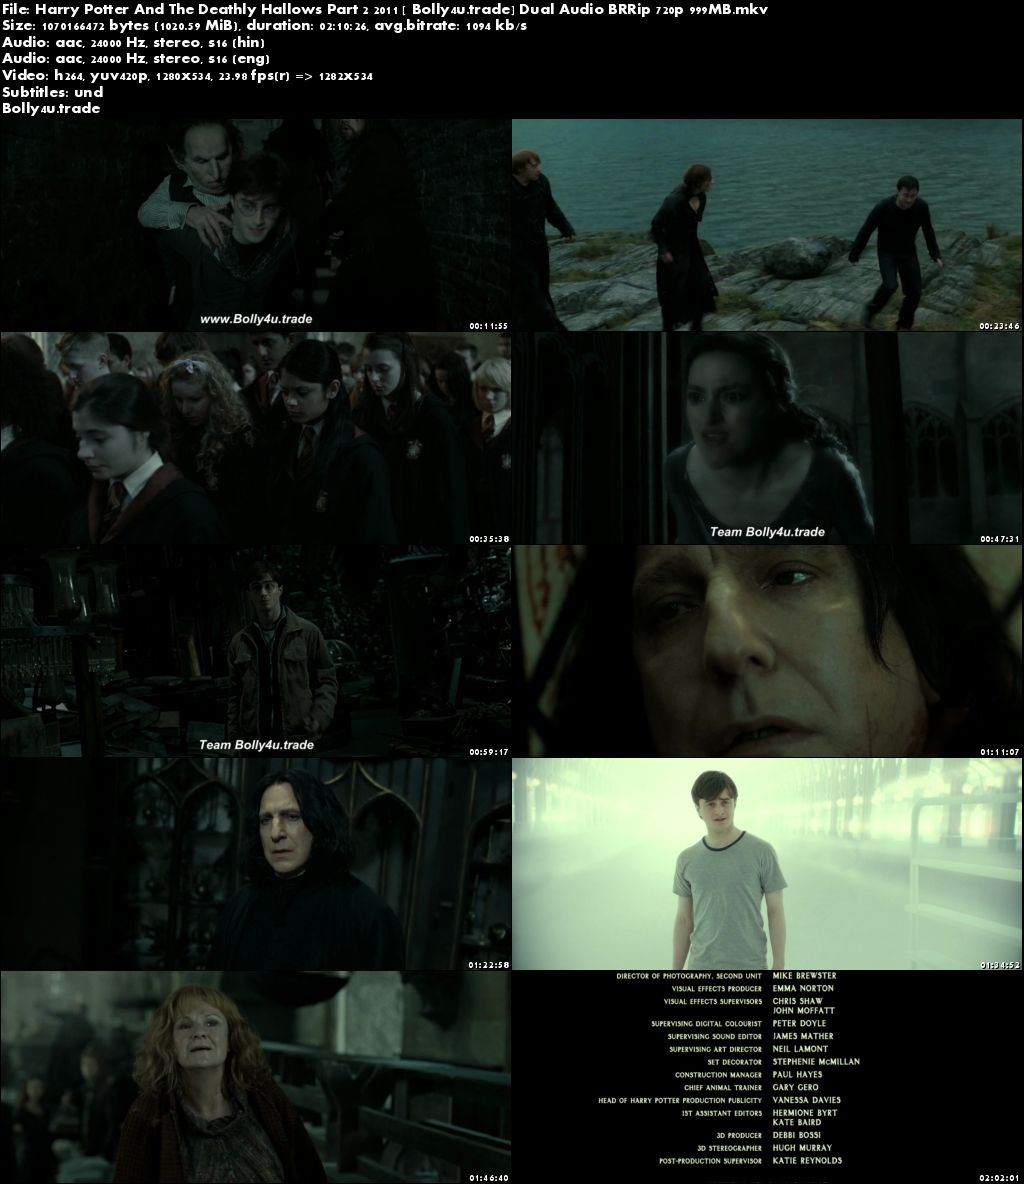 Harry Potter 4 Full Movie In Hindi Watch Online Hd